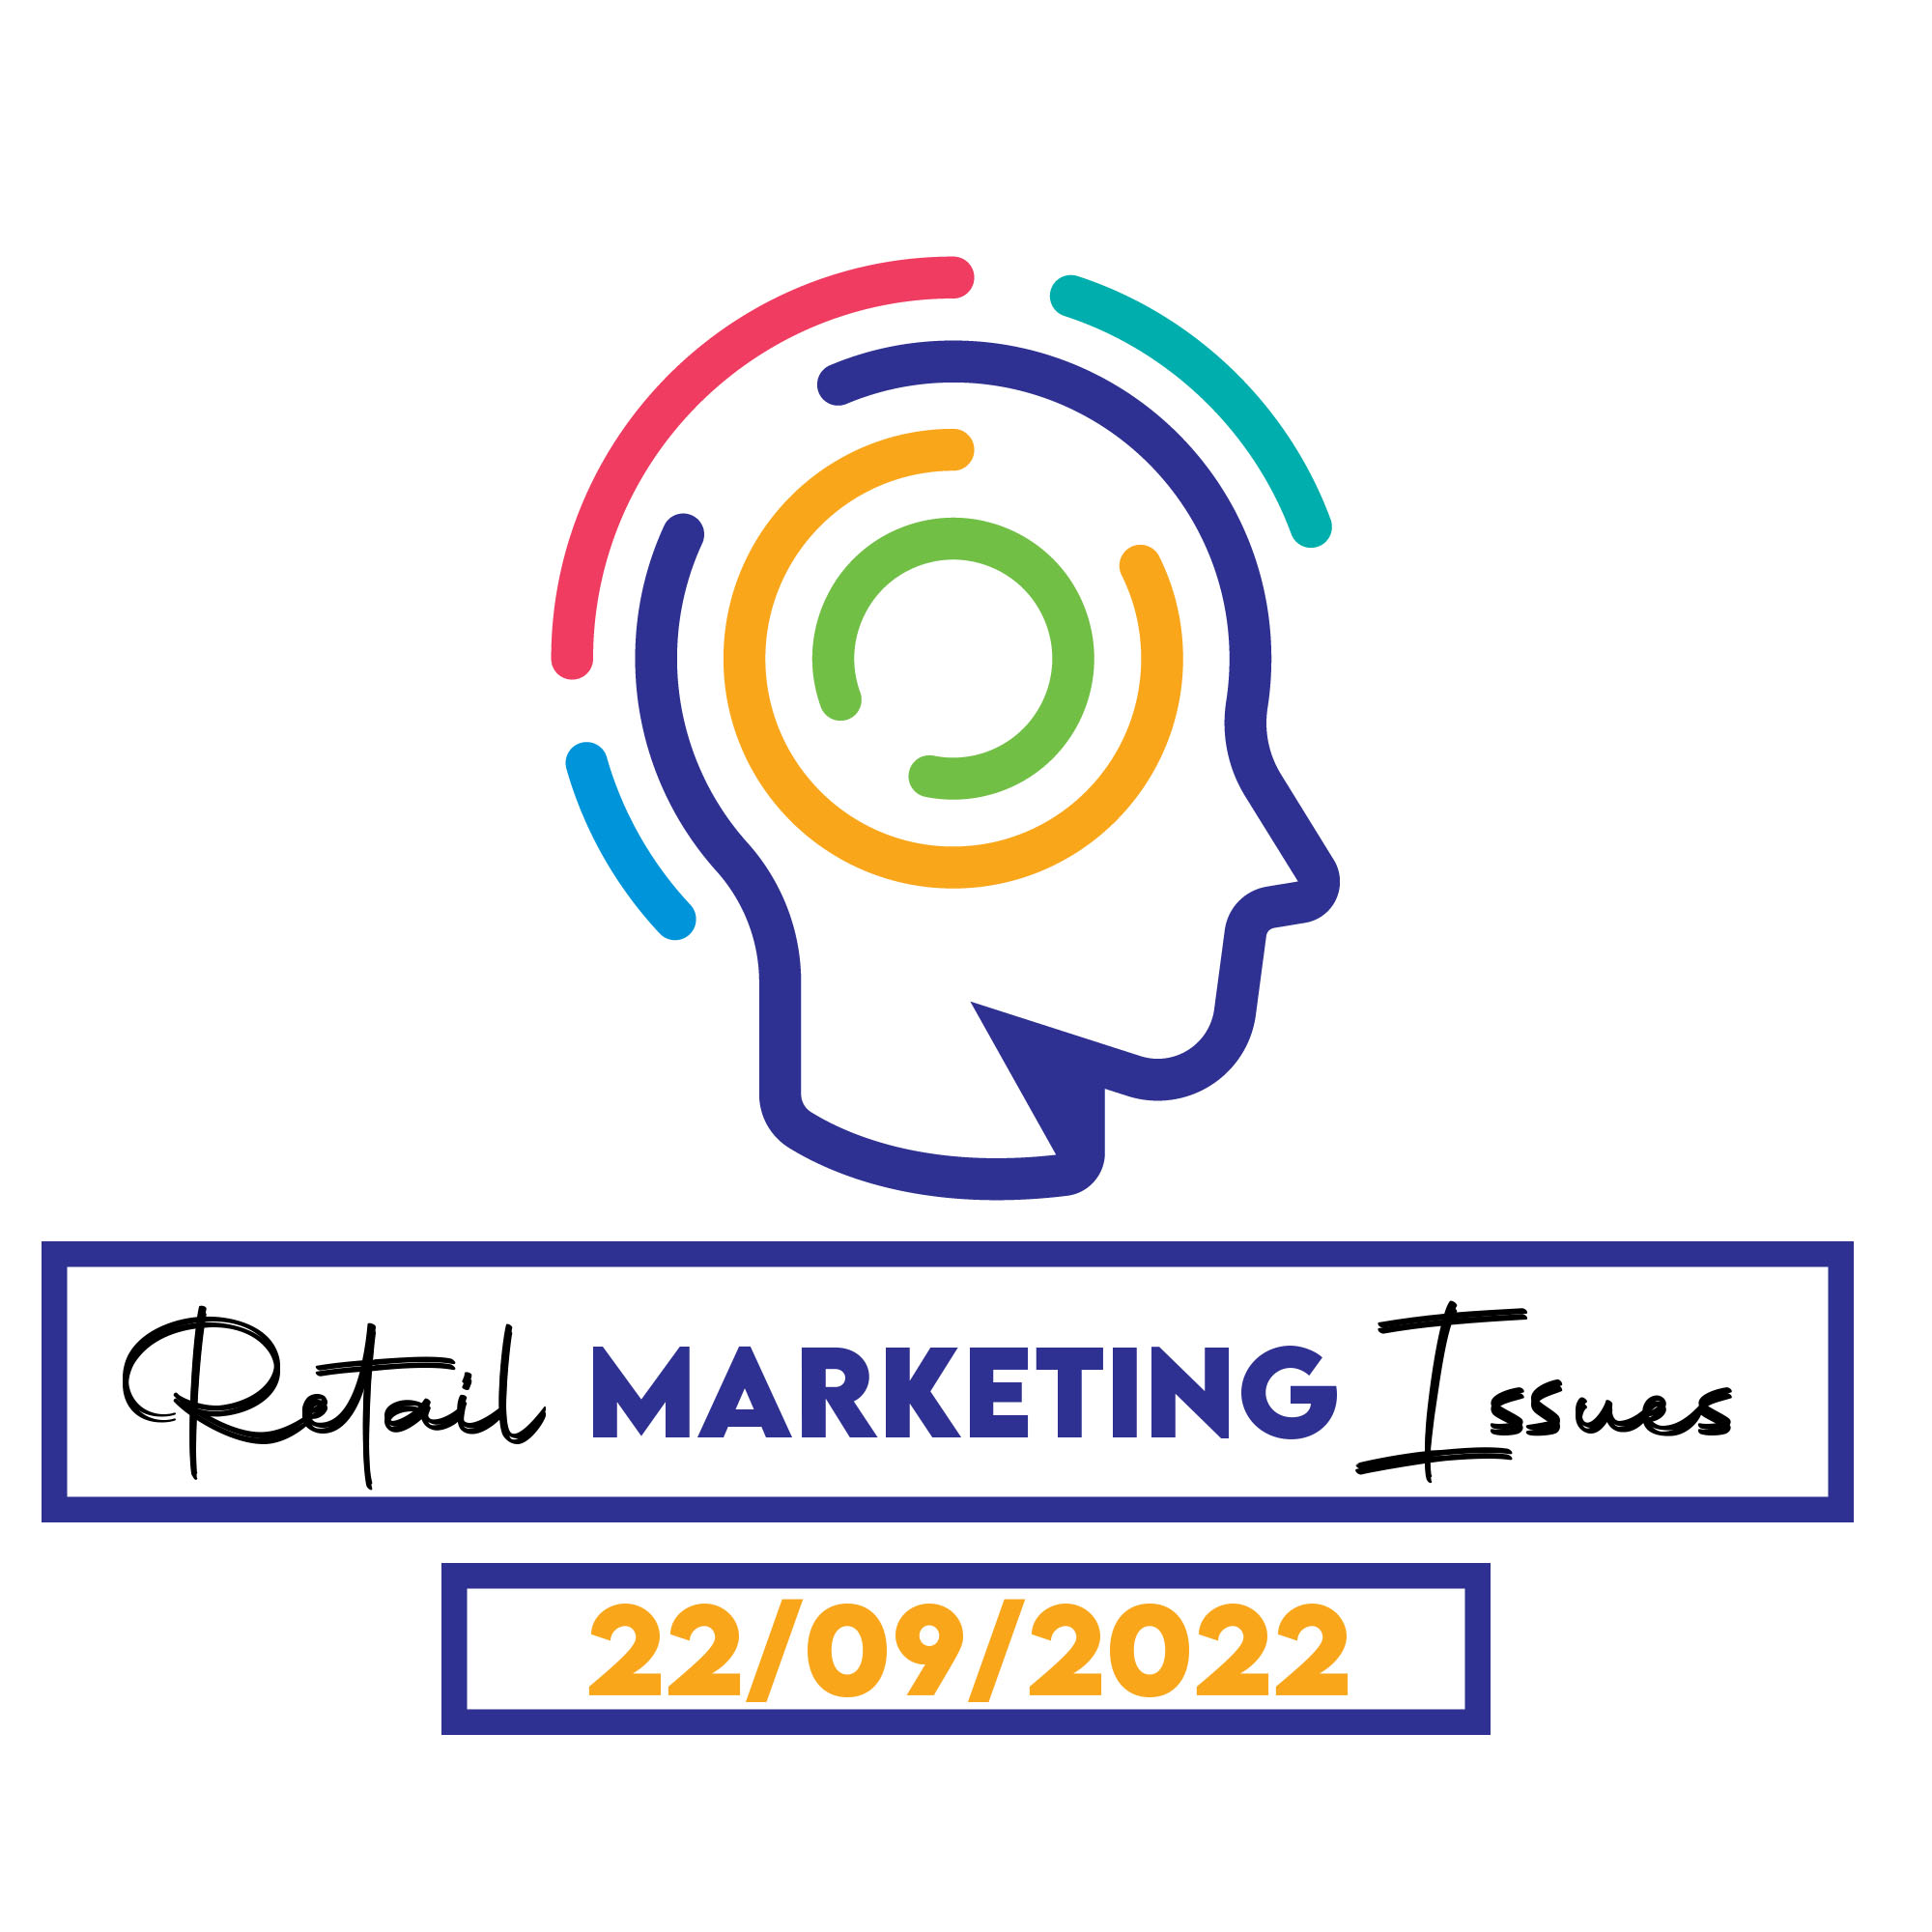 Retail Marketing Issues event